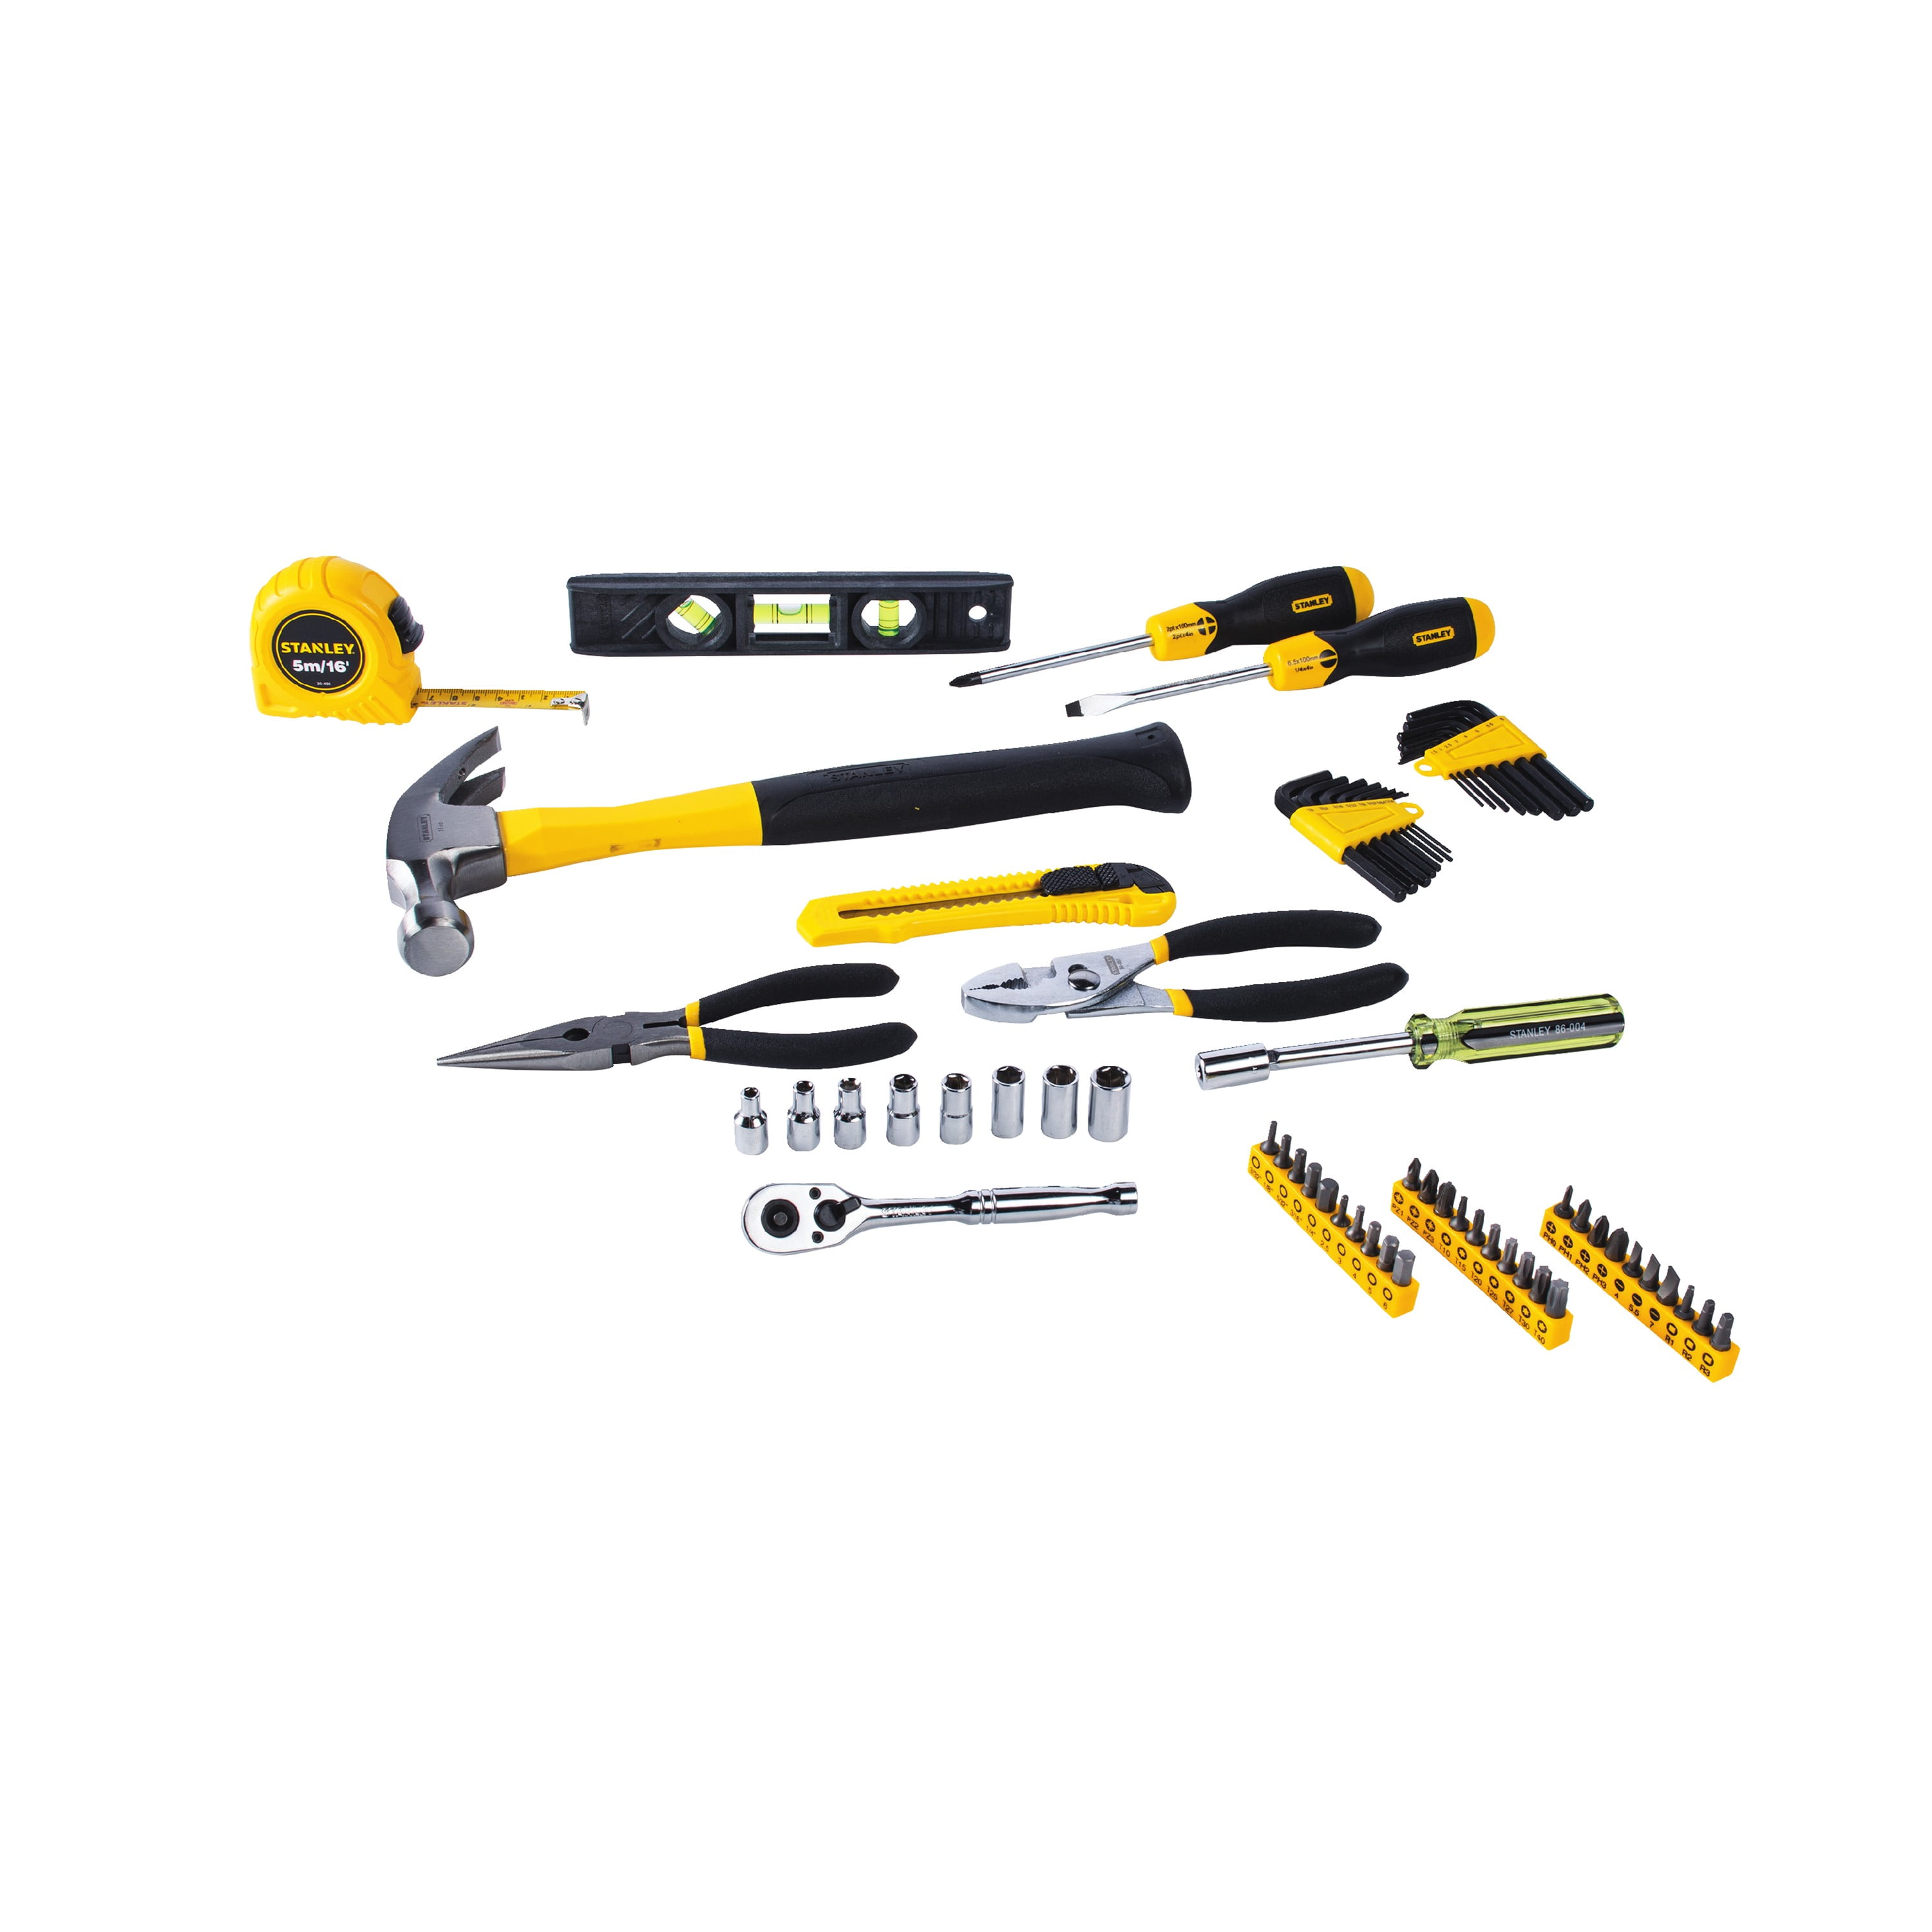 All-Purpose Household Mini Tool Kit with Basic Tools 65-Piece